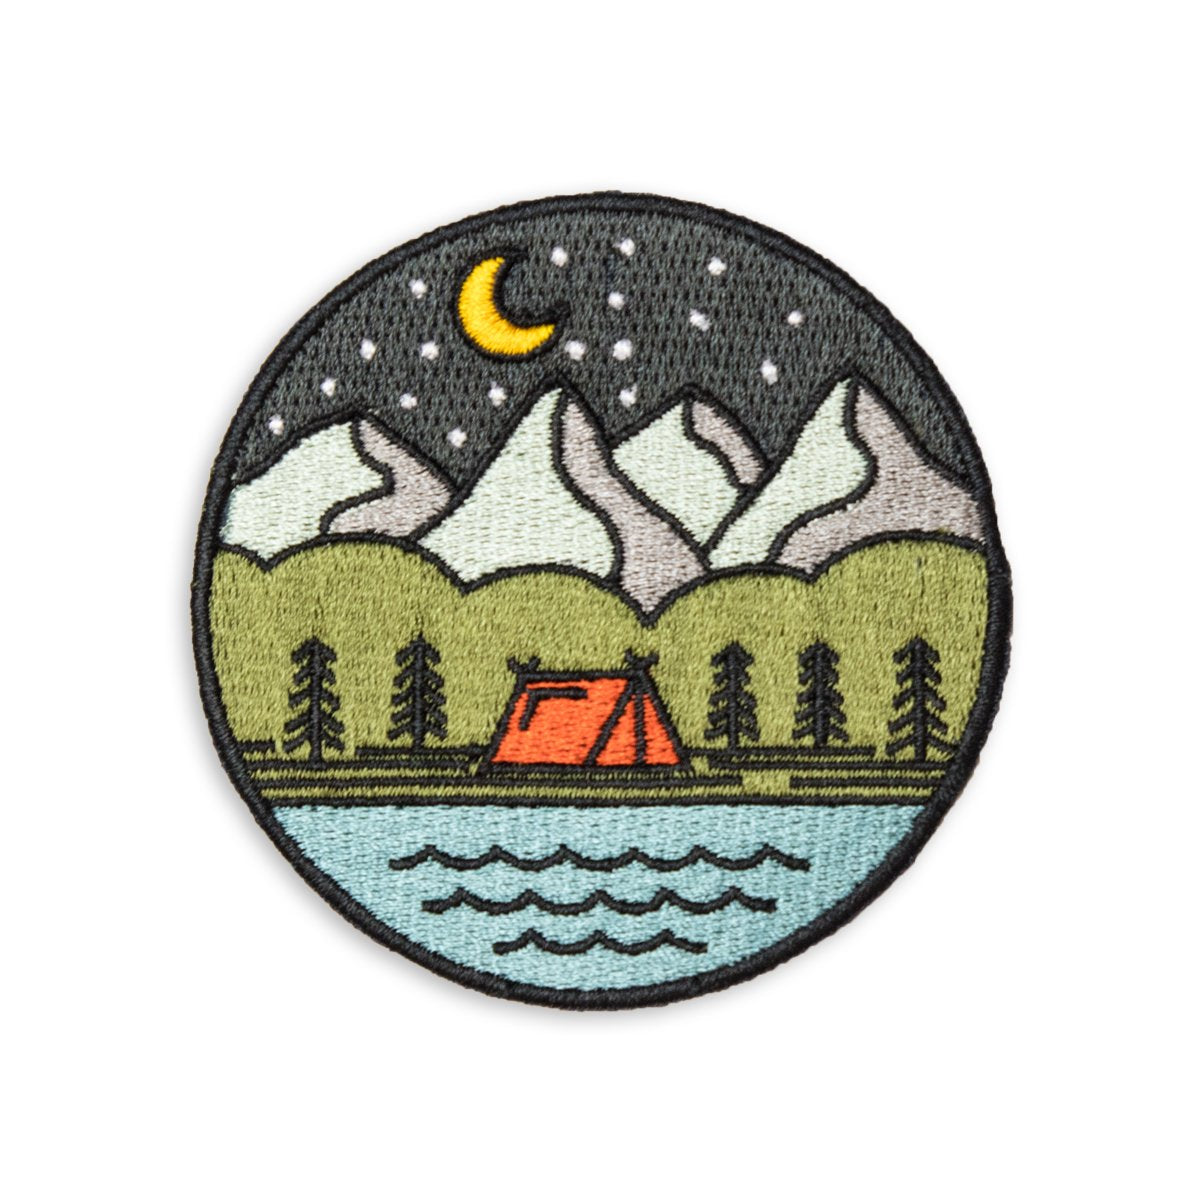 3" x 3" embroidered patch showcasing a tent with mountains in the background, at night with stars, beside a lake